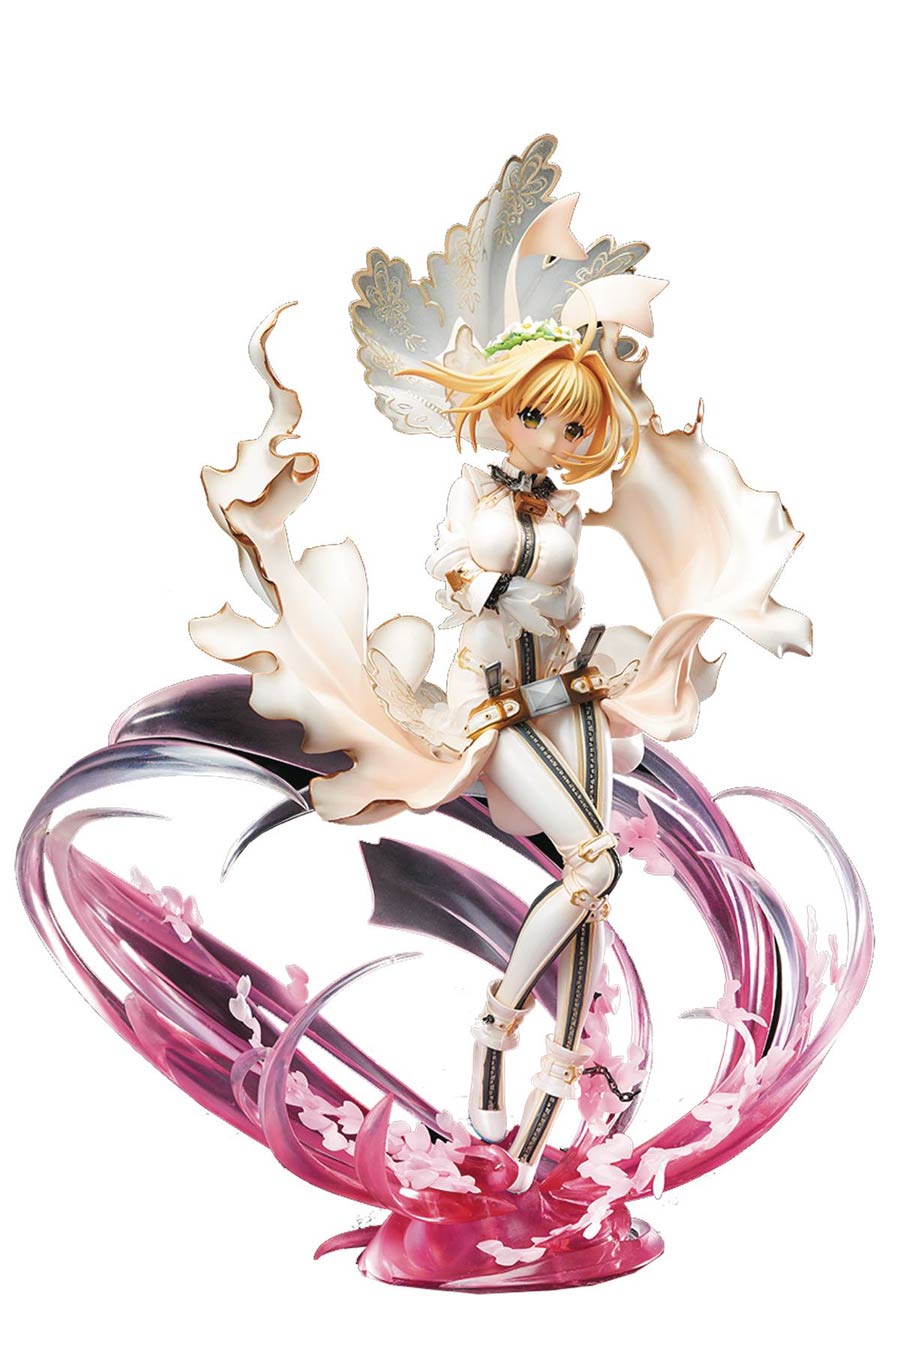 Fate/Extra CCC Saber Bride 1/8 Scale PVC Figure Special Edition